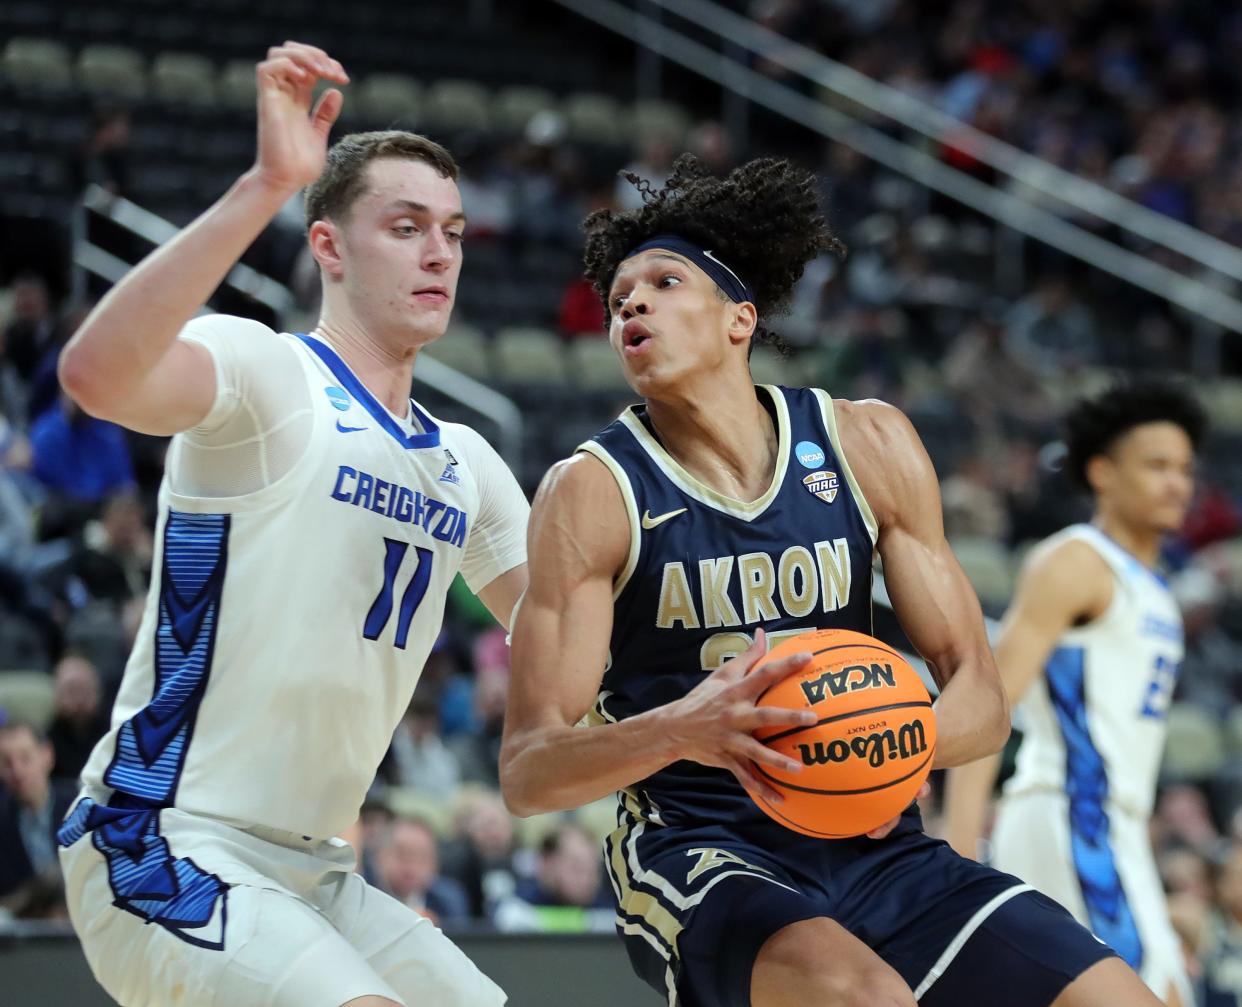 Akron's Enrique Freeman (25) drives against Creighton's Ryan Kalkbrenner (11) during the first half of an NCAA Tournament first-round game. Freeman will be participating in the NBA Combine this week in Chicago.